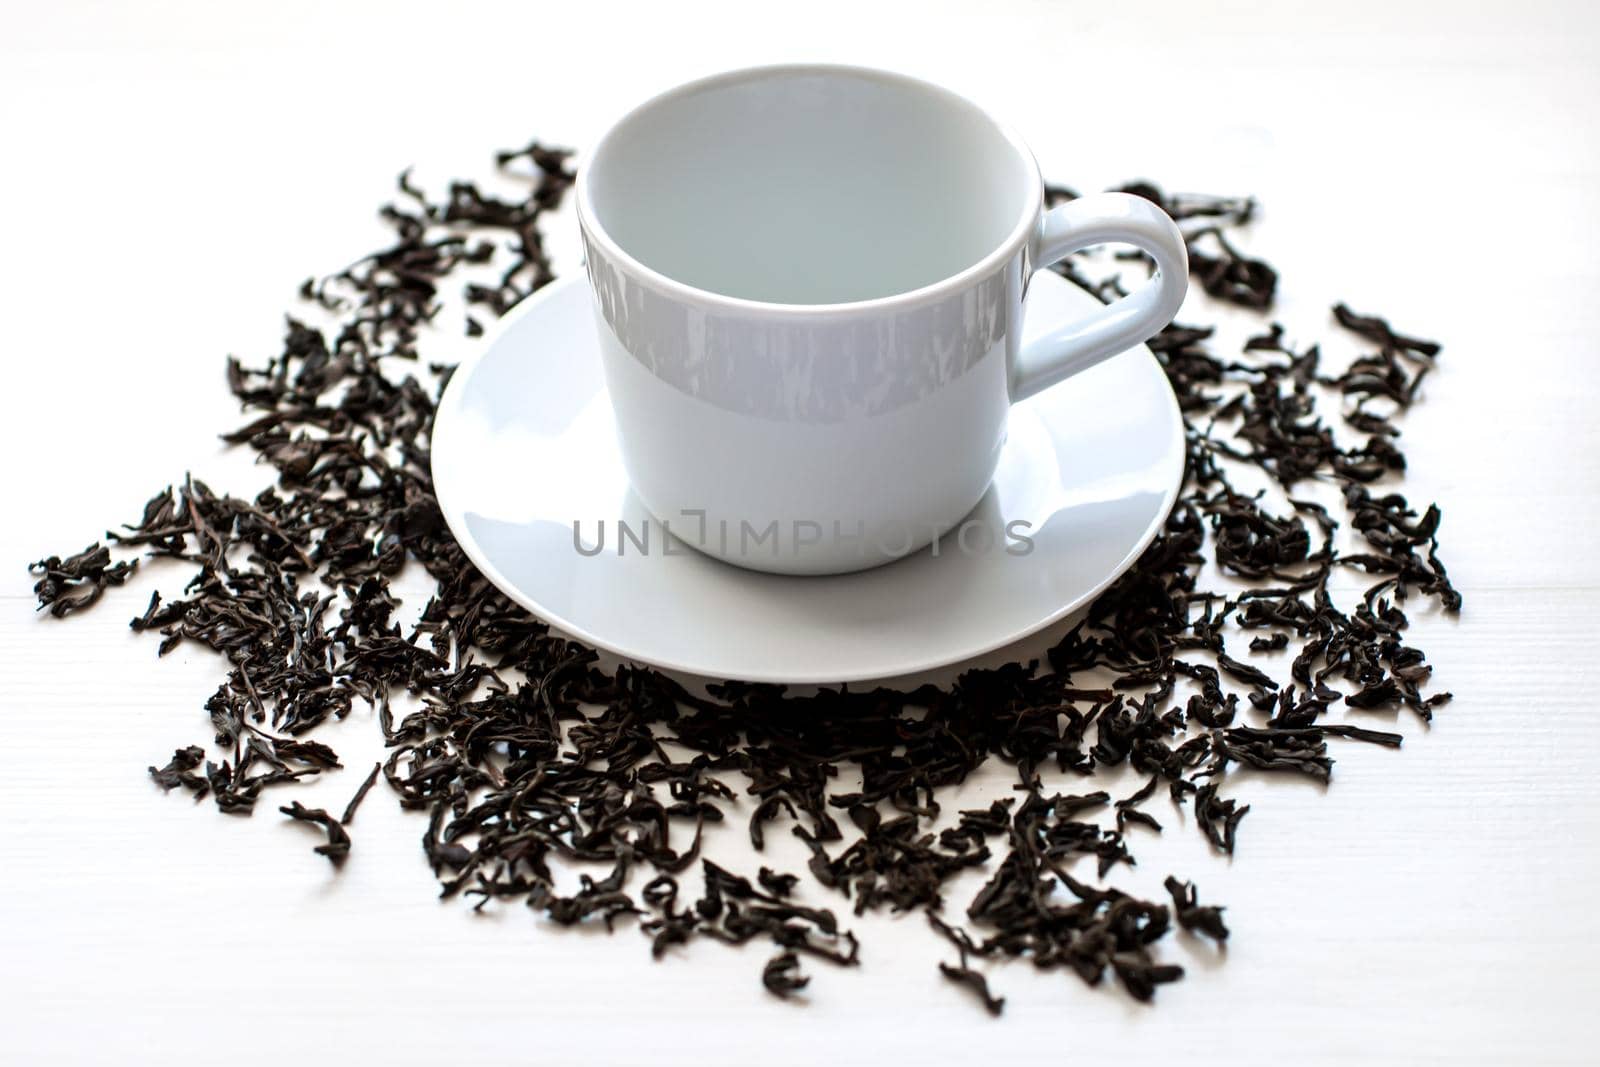 Ceramic white cup and saucer with scattered dried tea leaves around on a white wooden background